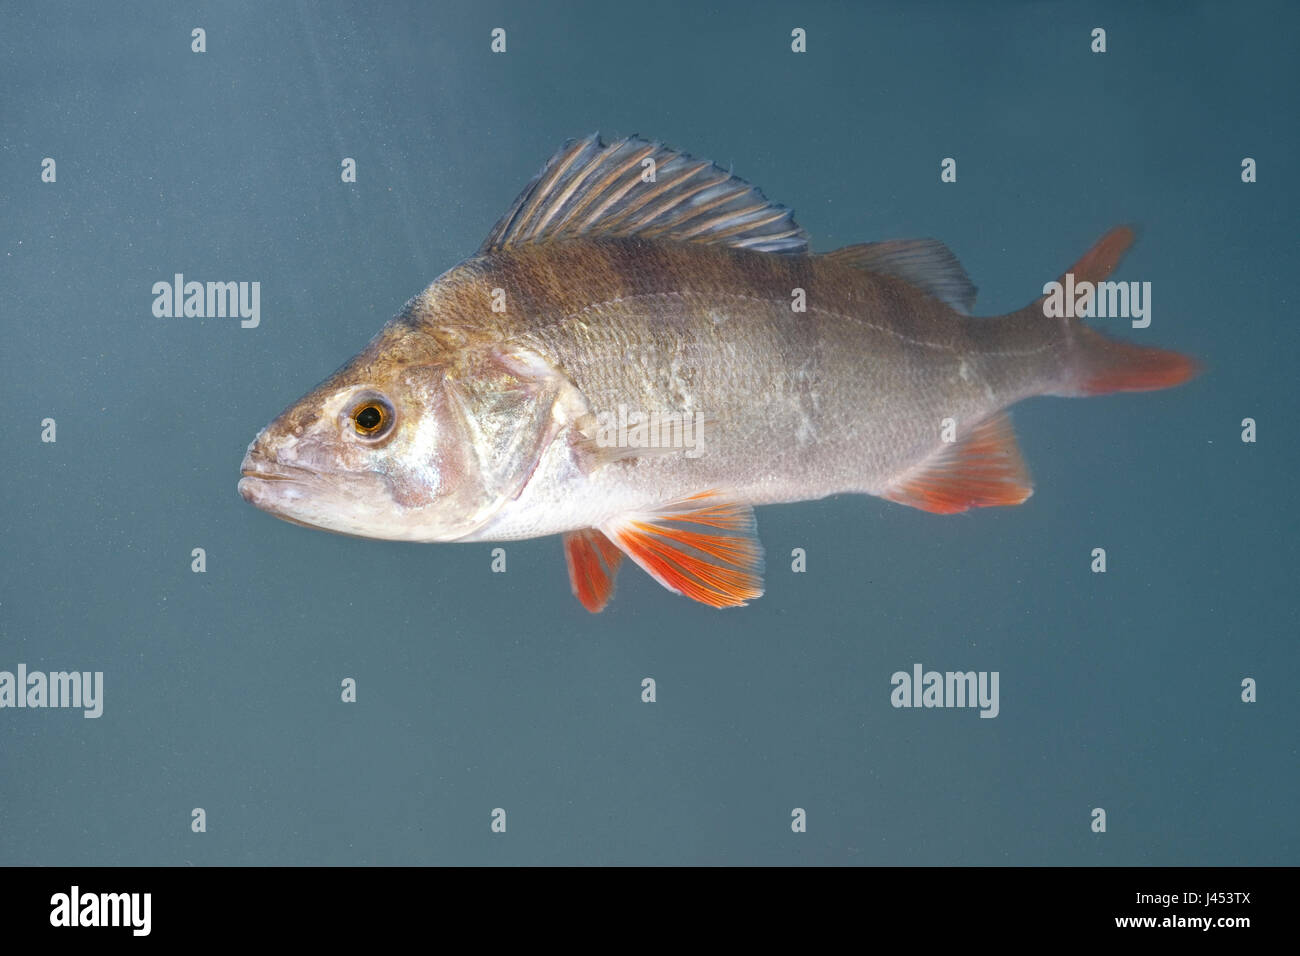 photo of a swimming perch against a blue background Stock Photo